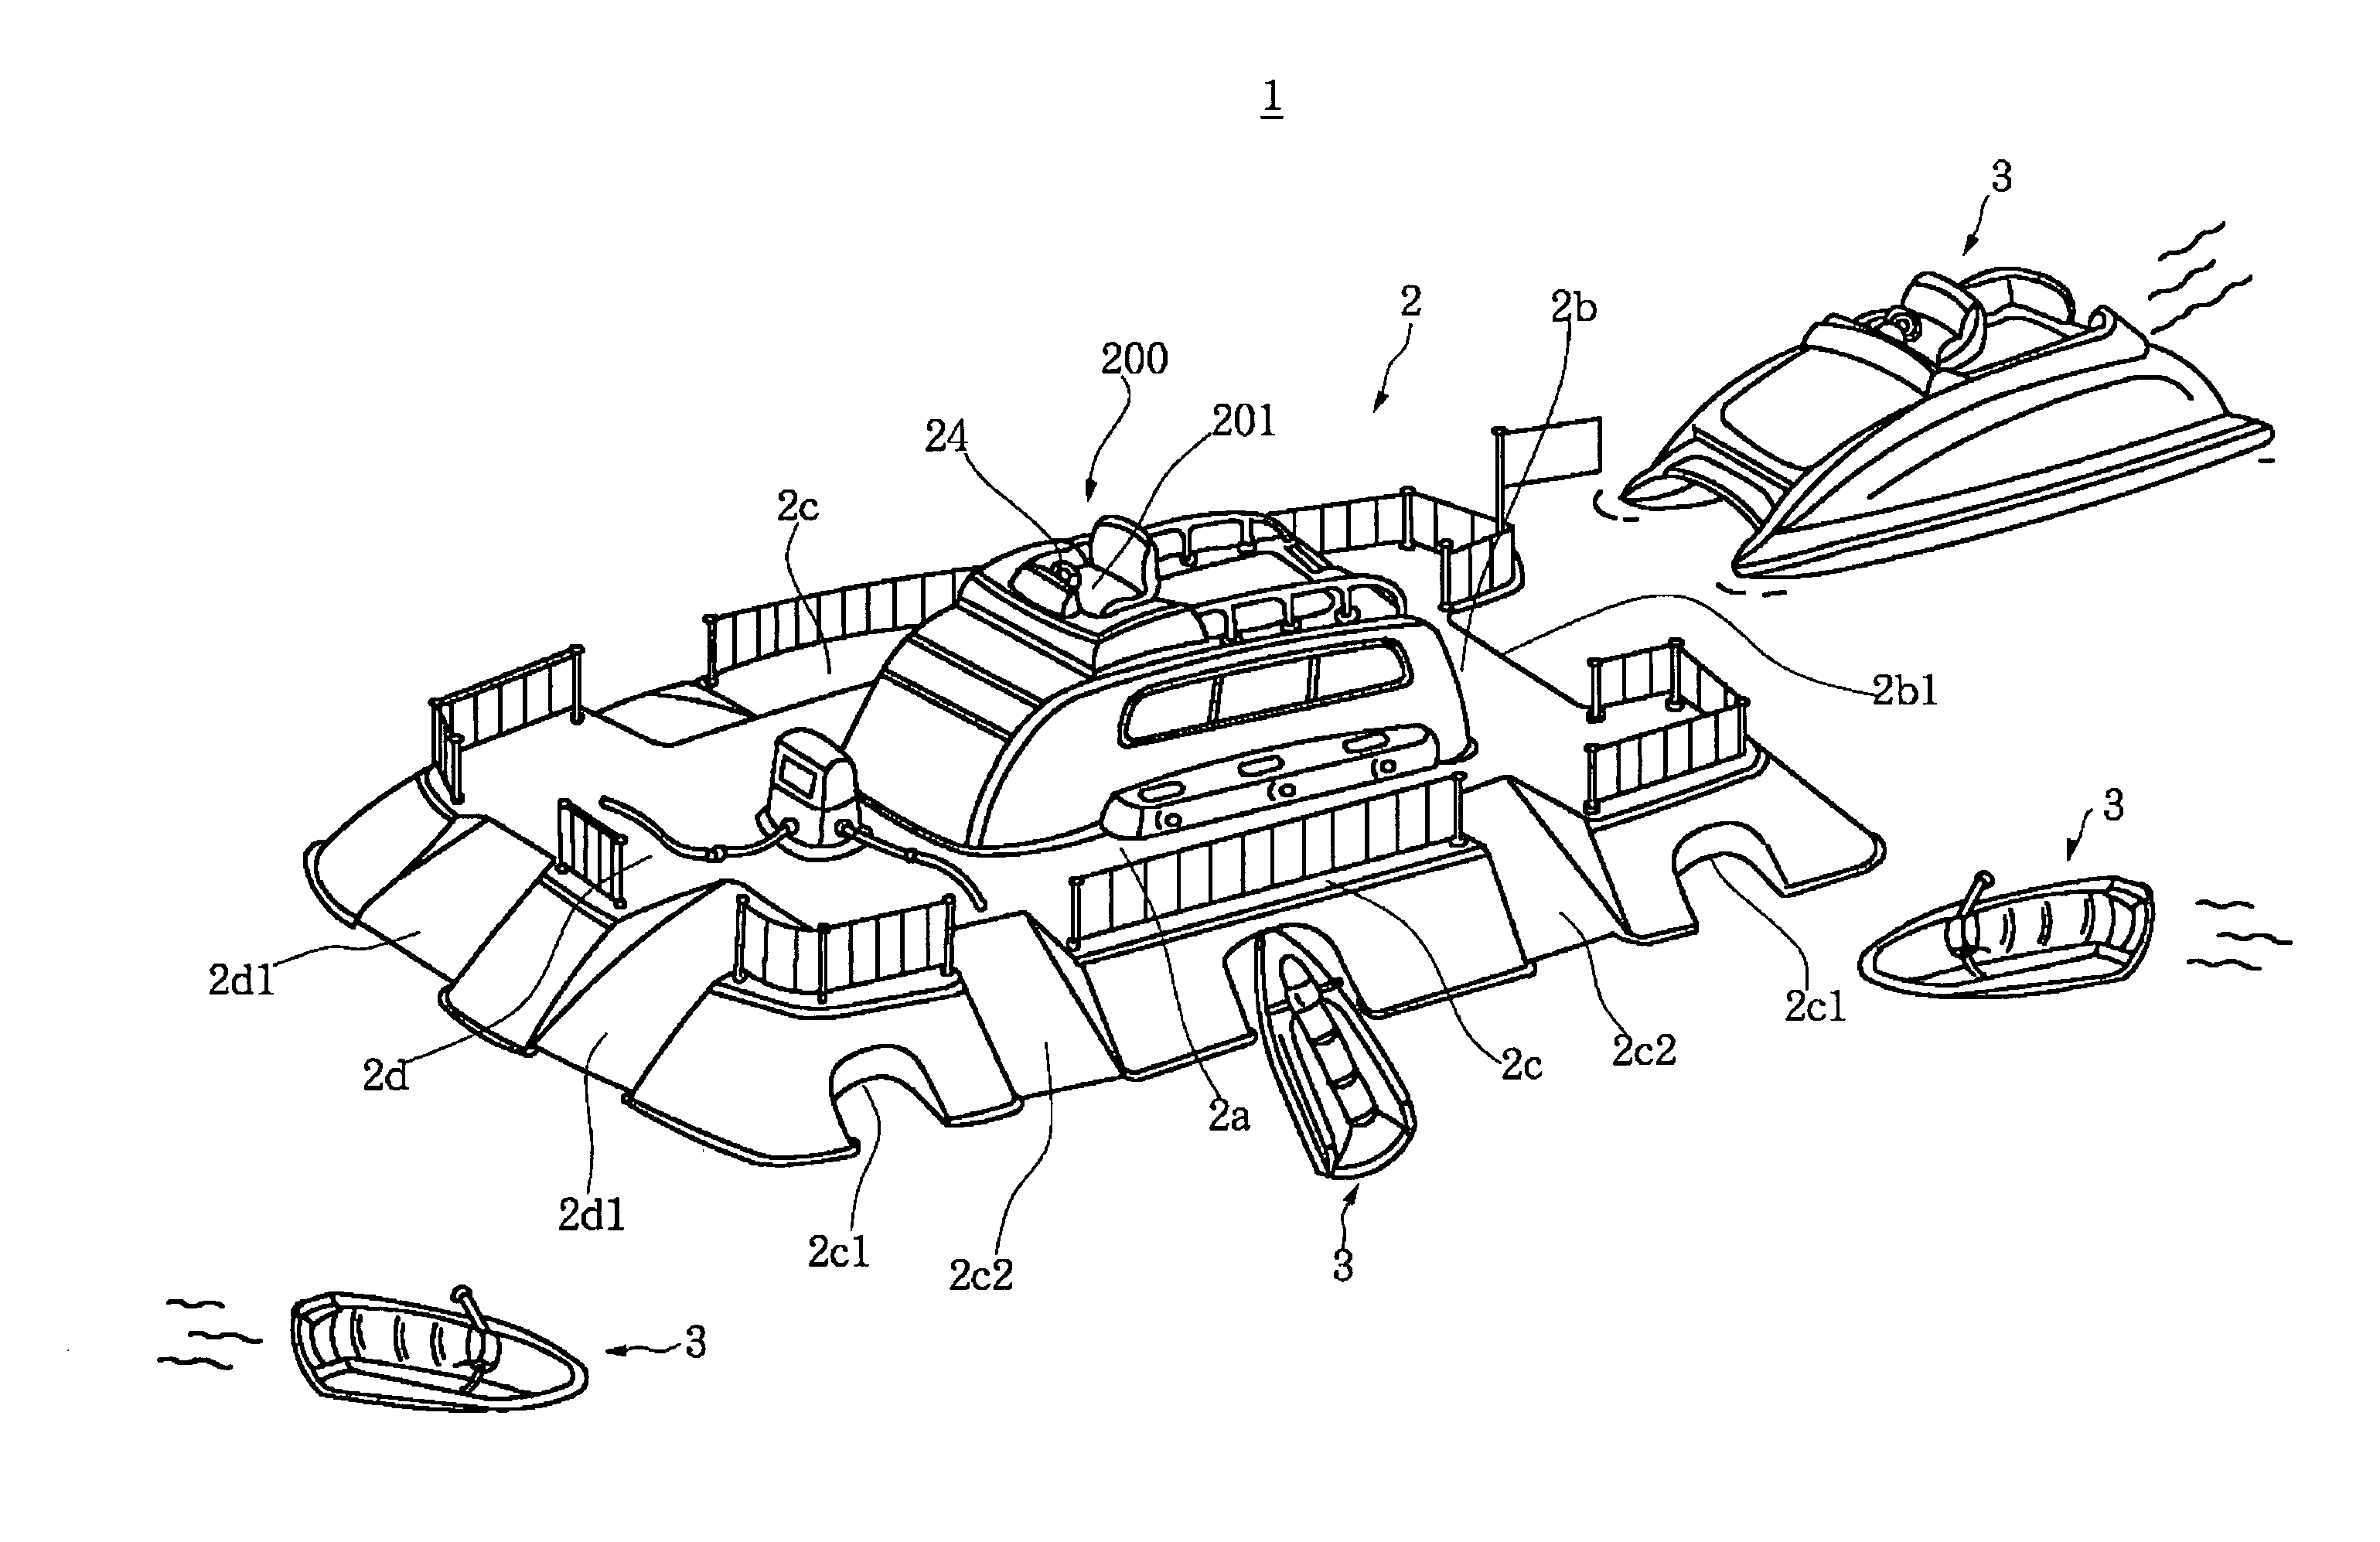 Parent-child type boat with generator